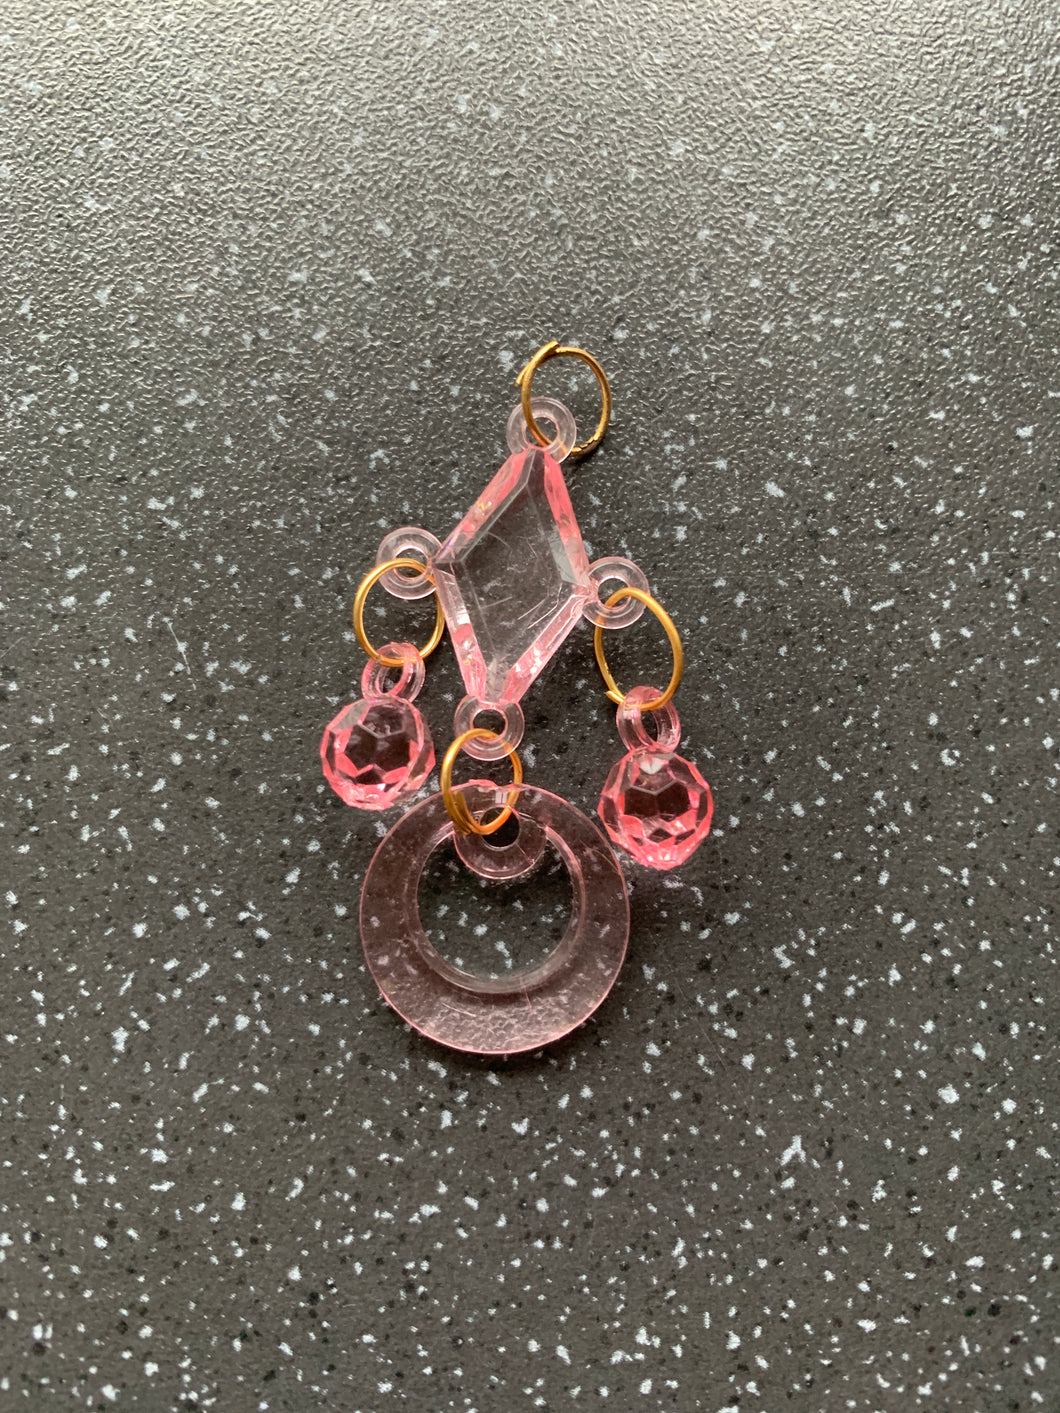 Manifest Twin Flame Union Intention Tassel Pink Ornament 5cm Manifesting divine connection Hanging Charm Decoration Law of attraction